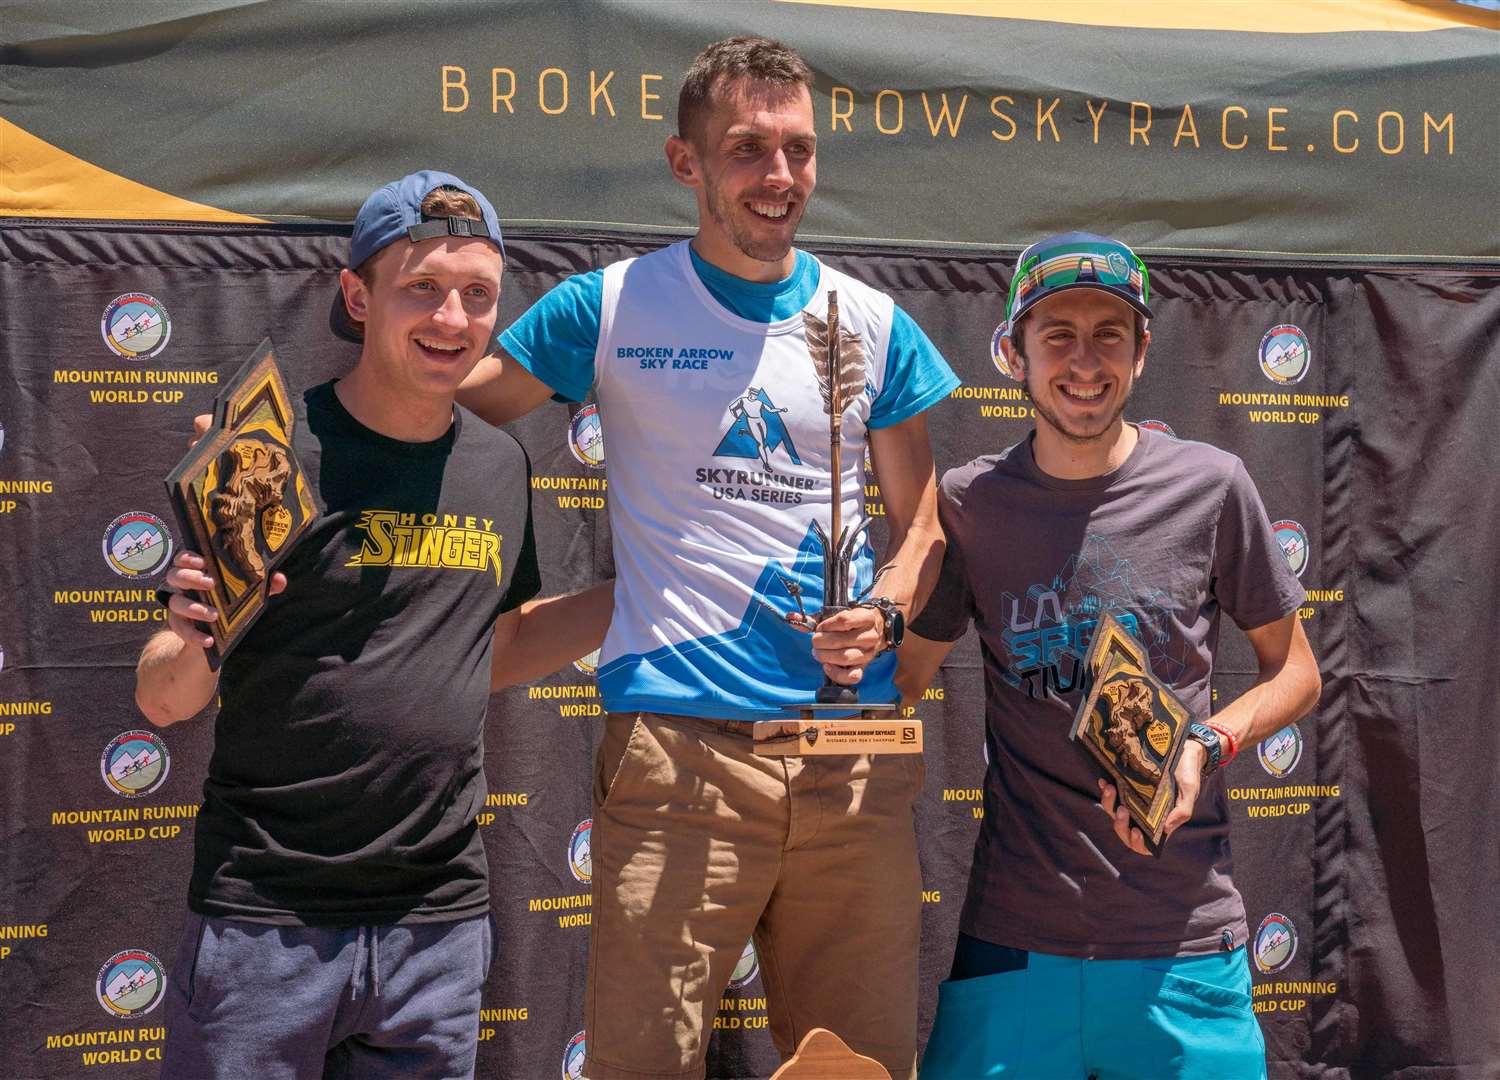 Halkirk athlete, Andrew Douglas, won the Broken Arrow Skyrace 26km – his second win in as many races in this year's Mountain Running World Cup Series – in a time of 1hr 56min 31secs. Second place went to Sam Sahli (left) of the United States who crossed the line in 2hr 6min 18secs with Italy's Henri Aymonod (right) finishing third in 2hr 8min 3secs. Picture: Broken Arrow Skyrace/Myke Hermsmeyer.